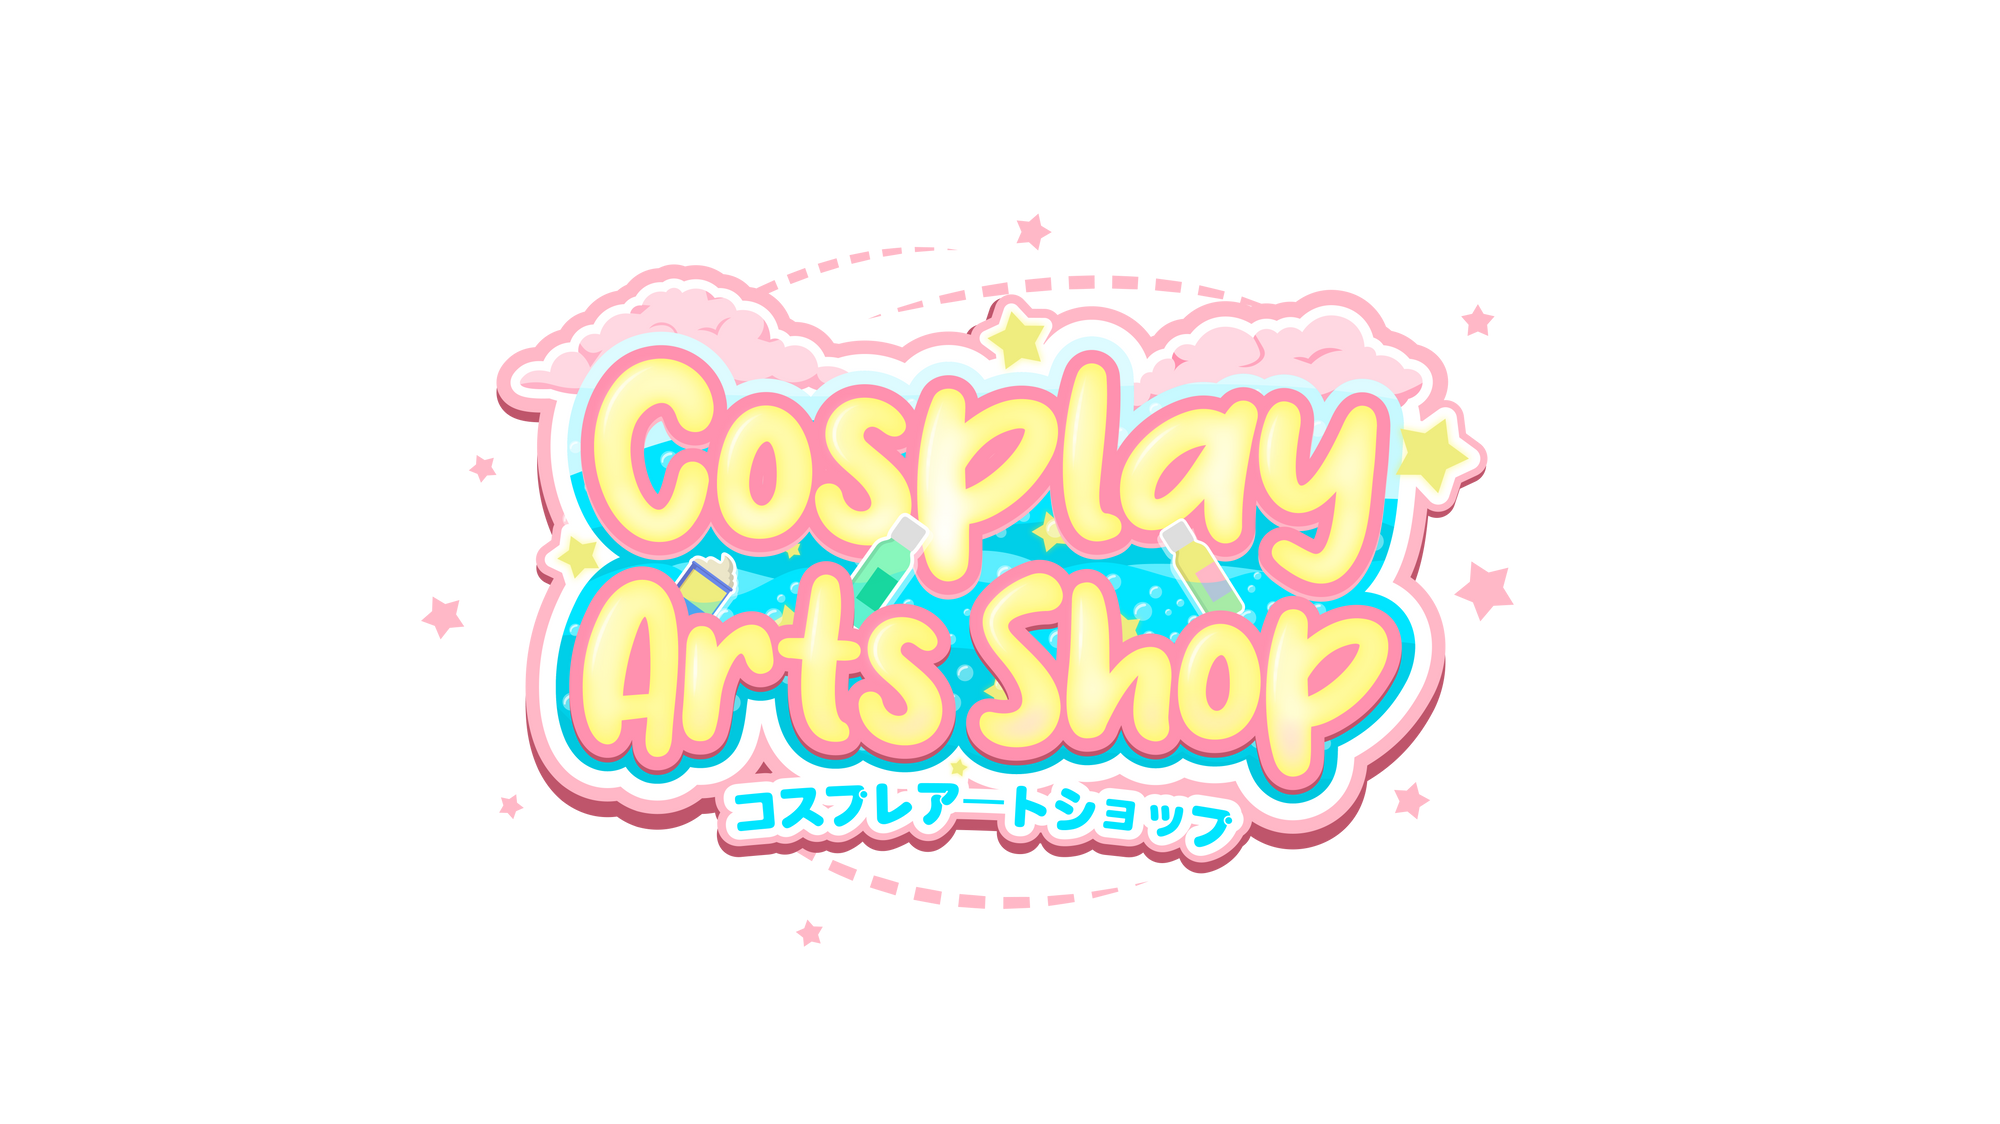 Giving You the Best Handmade Products - Cosplay Arts Shop